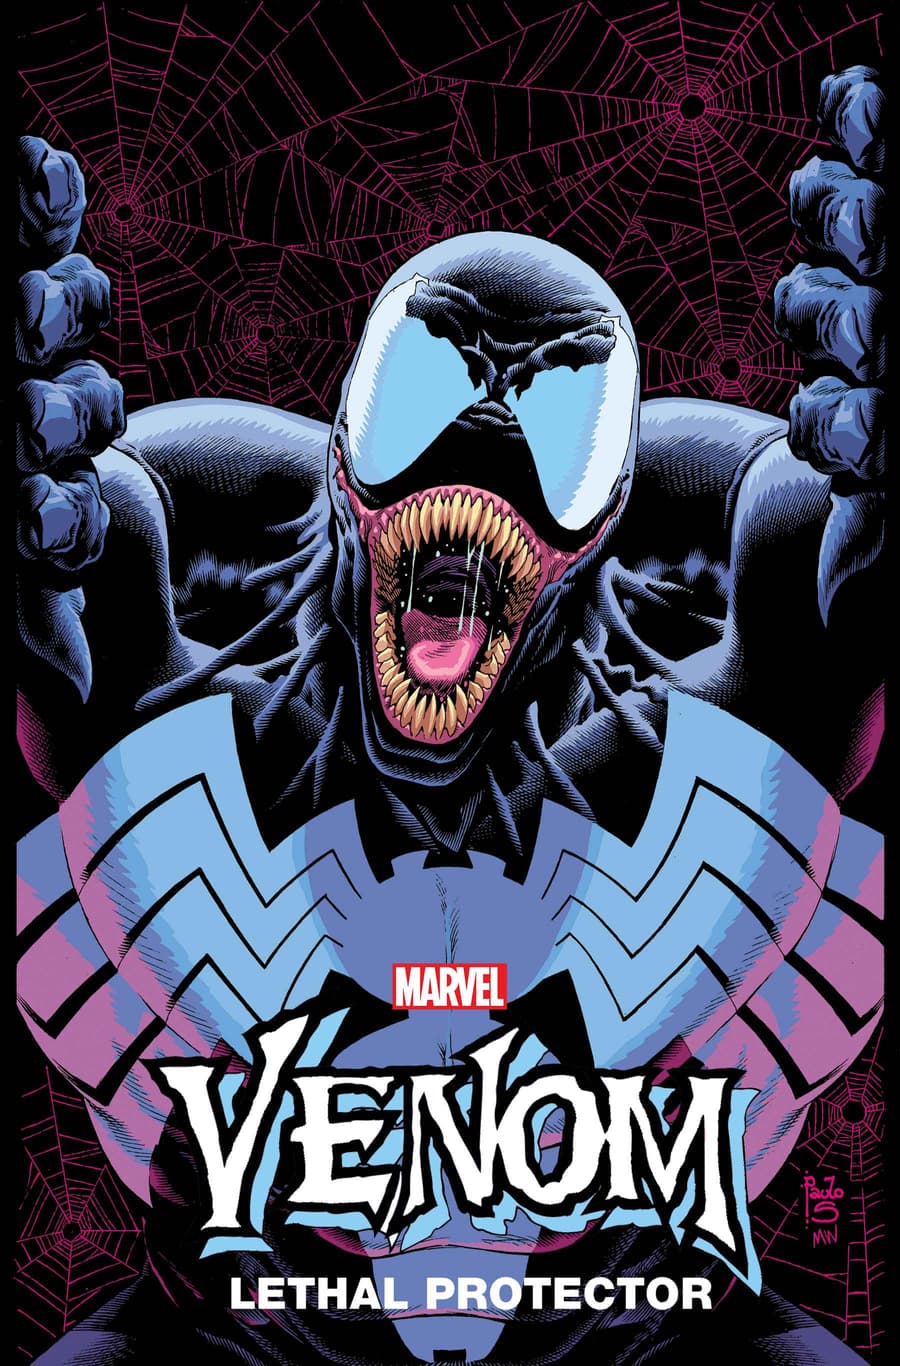 VENOM: LETHAL PROTECTOR II #1 (OF 5) Cover by PAULO SIQUEIRA